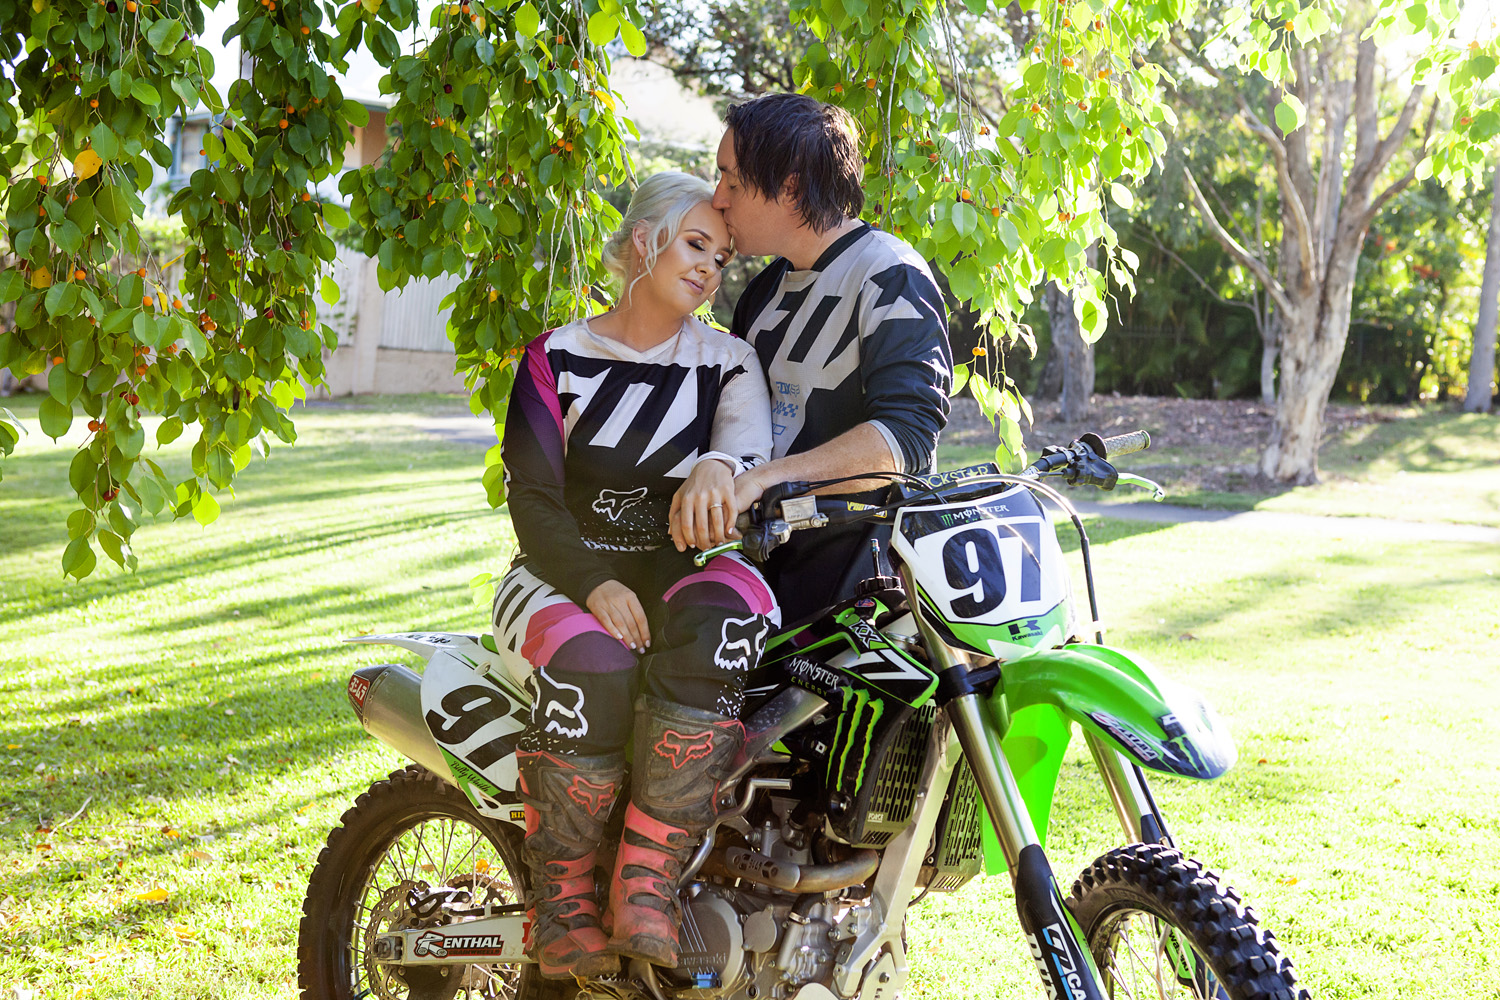 Couple sitting on a dirt bike, couple snuggling with heads together, couple engaged, gold coast best portrait photographer, gold coast best couple photography, gold coast couple portraits, gold coast photographer, gold coast engagement, gold coast engagement photoshoot, gold coast engagement shoot, gold coast engagement photography, engagement shoot with personality, lana noir, @lananoir, gold coast natural light photography, gold coast outdoor photography, robina photographer, broadbeach photographer, gold coast professional photographer, gold coast couple, couple photography